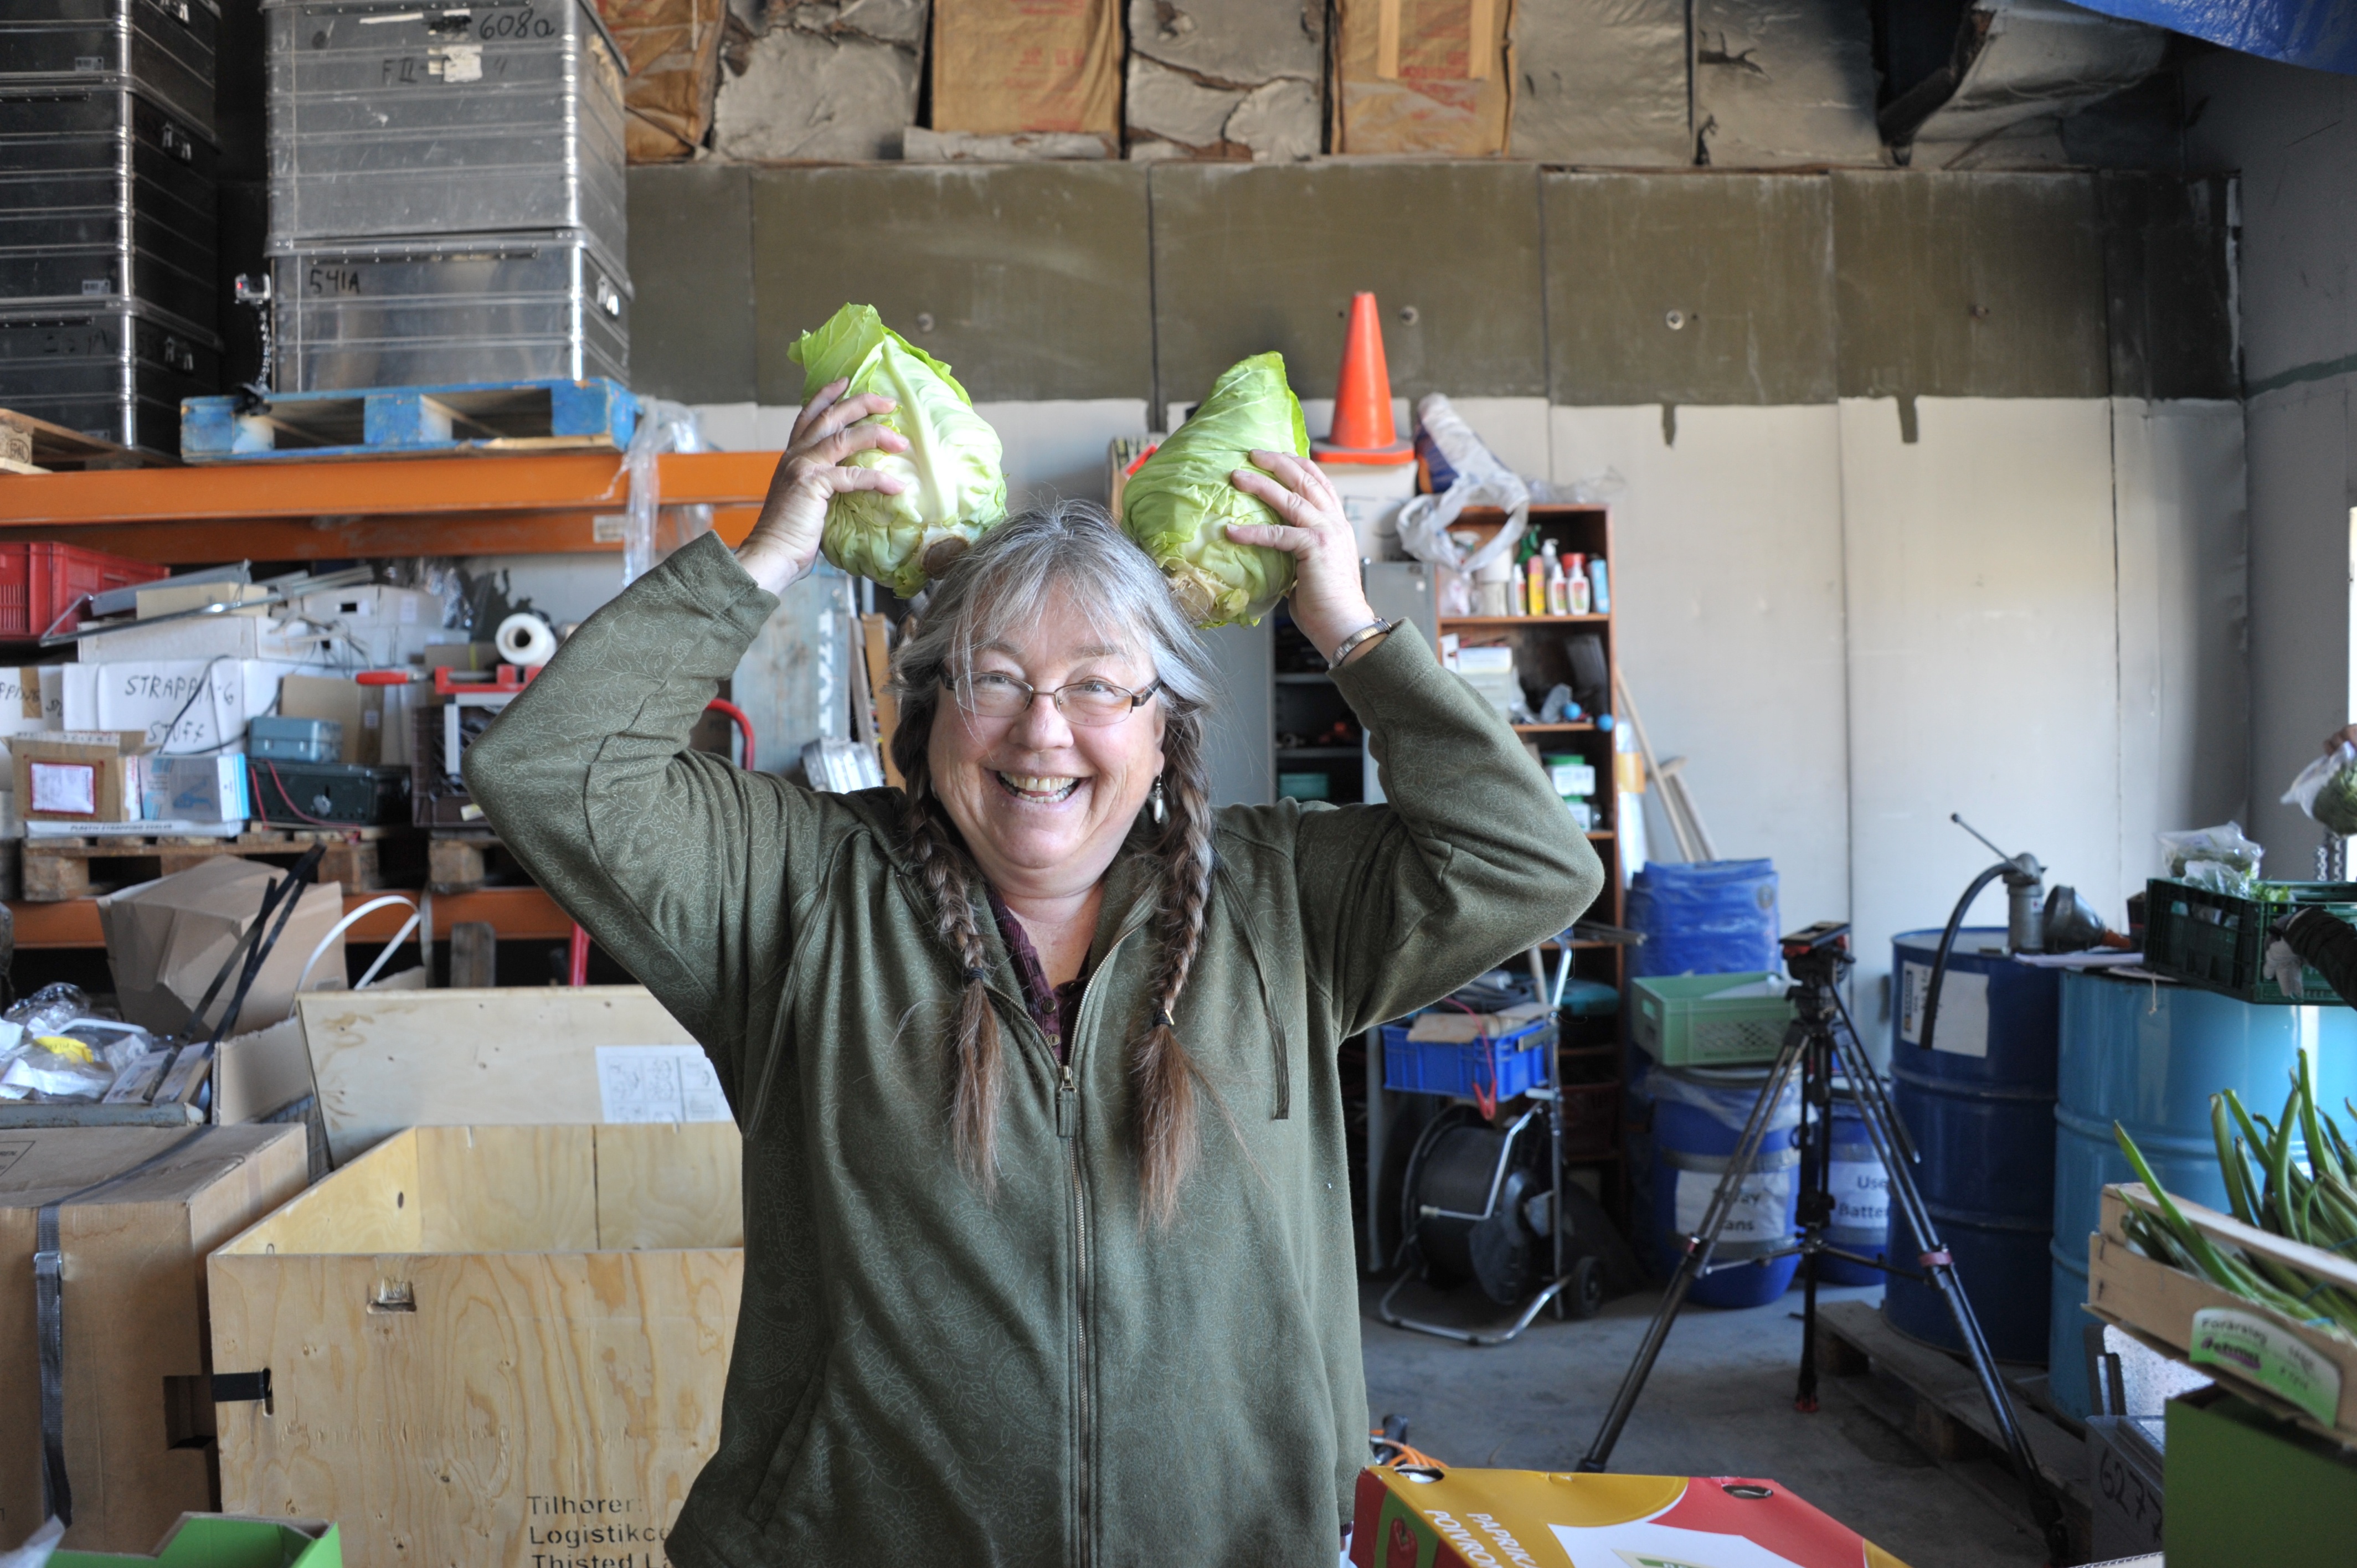 Sarah the cook in the ware house in Kangerlussuaq packing food - and having a little fun